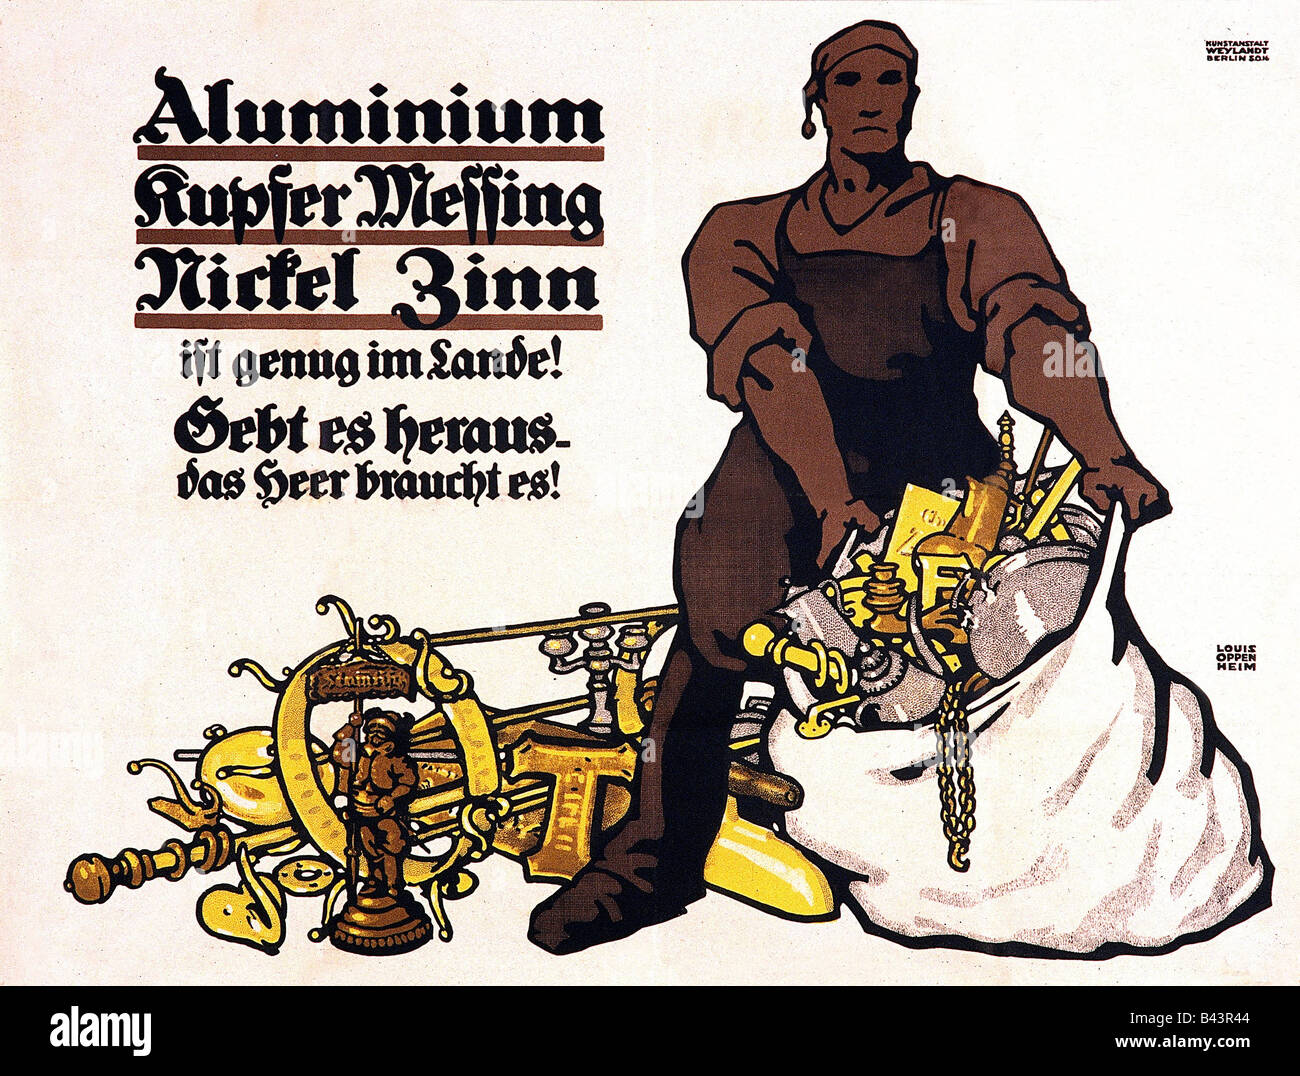 events, First World War / WWI, Germany, poster 'Aluminium Kupfer Messing Nickel, Stock Photo